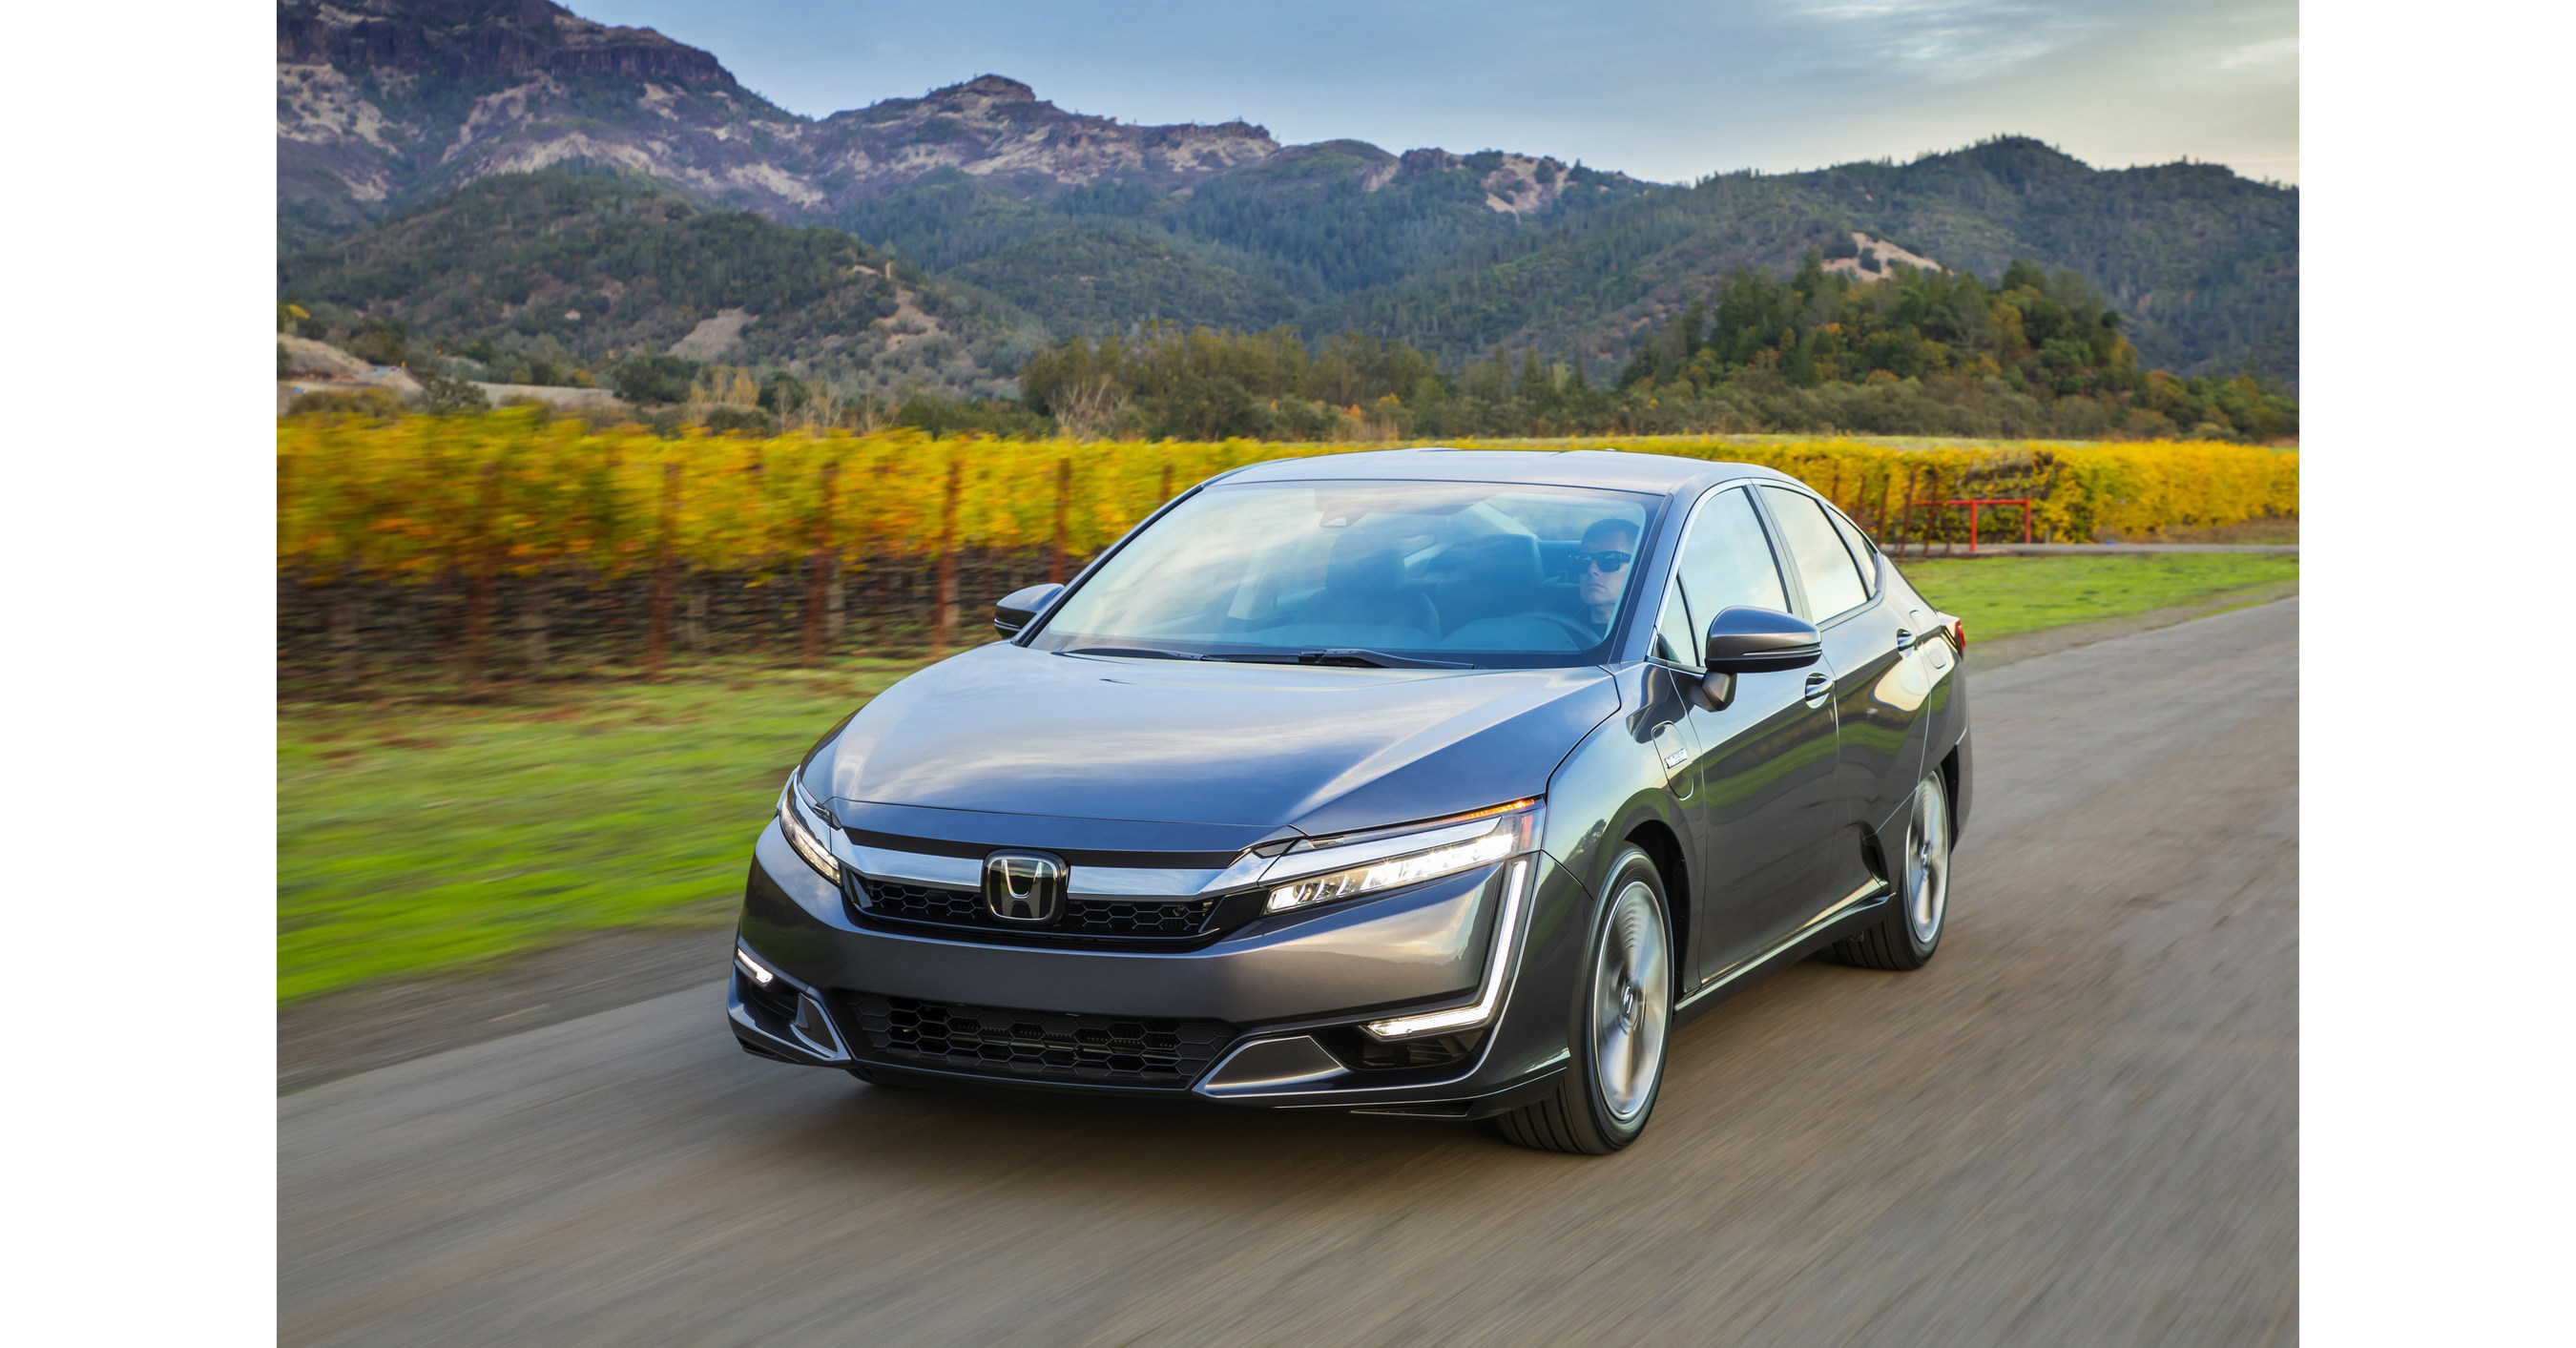 Honda Clarity Plug In Hybrid Delivers Premium Driving Experience With Excellent Driving Range And Fuel Economy Ratings